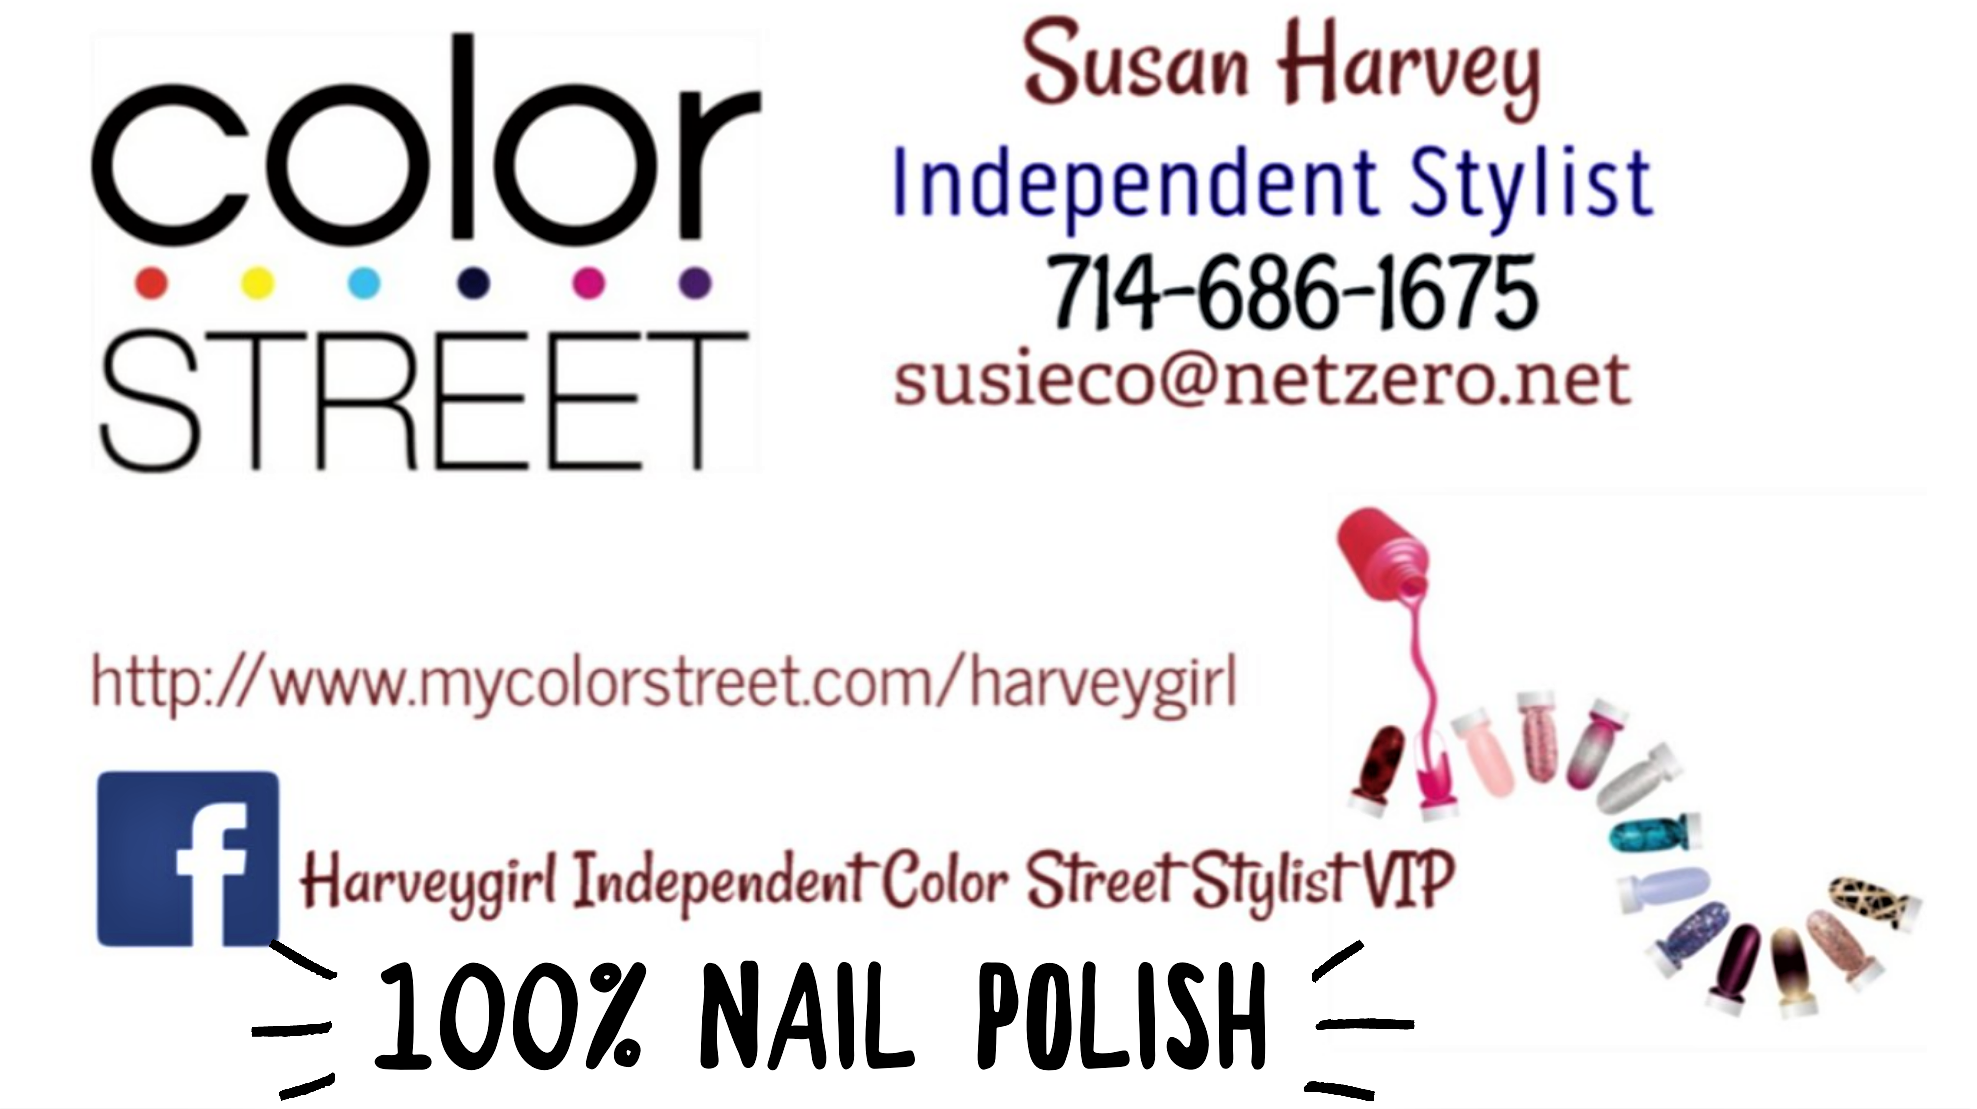 Color Street Playbill Ad.png